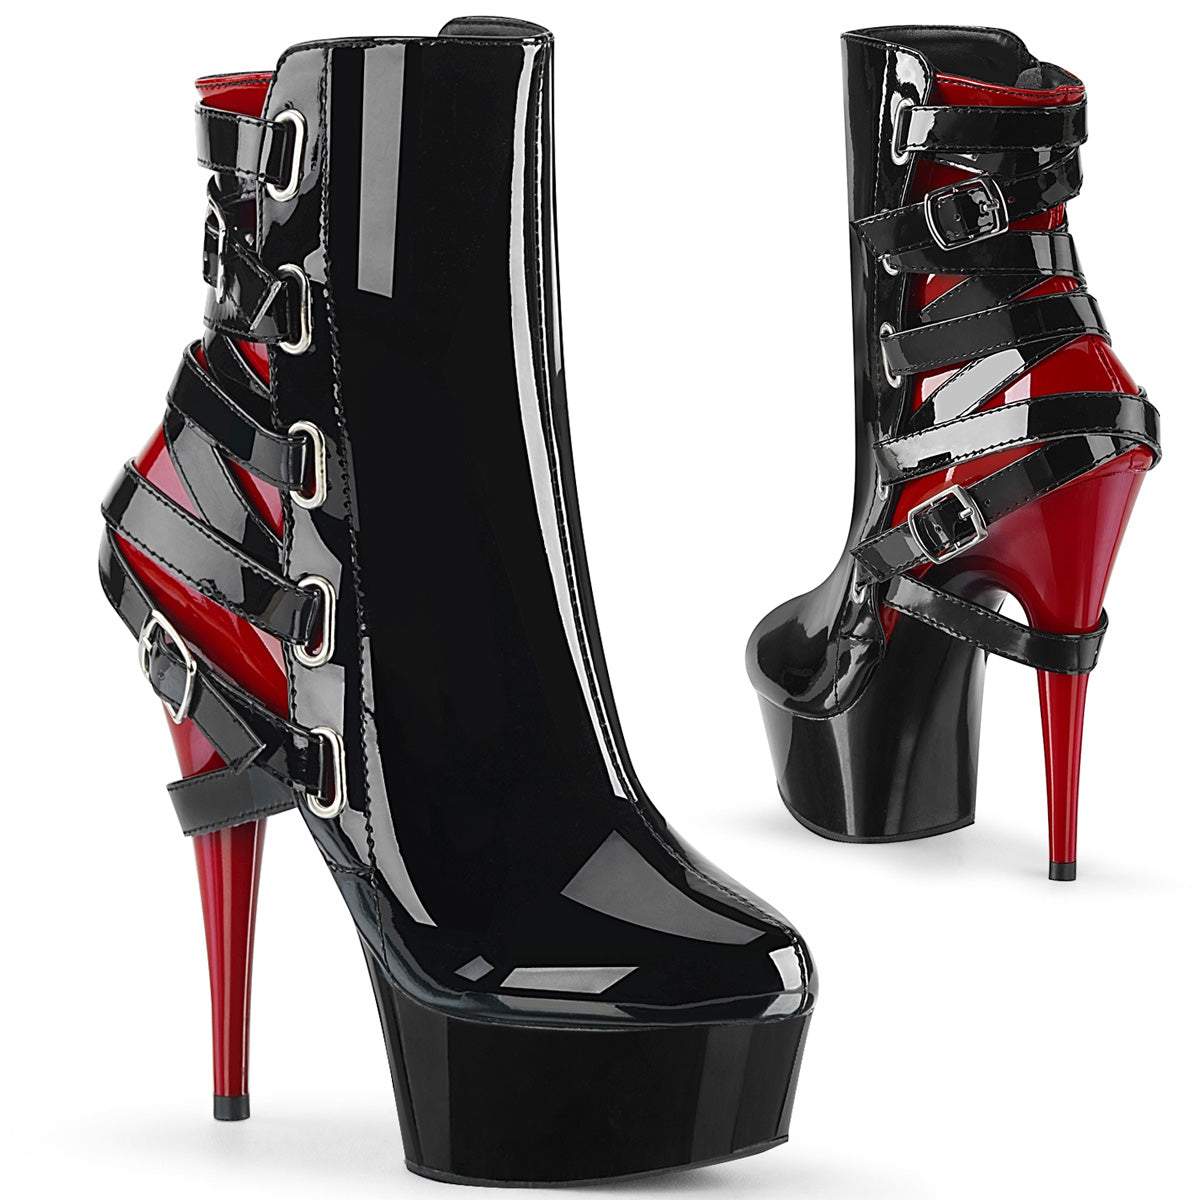 DELIGHT-1012 6" Heel Black and Red Pole Dancing Platforms-Pleaser- Sexy Shoes